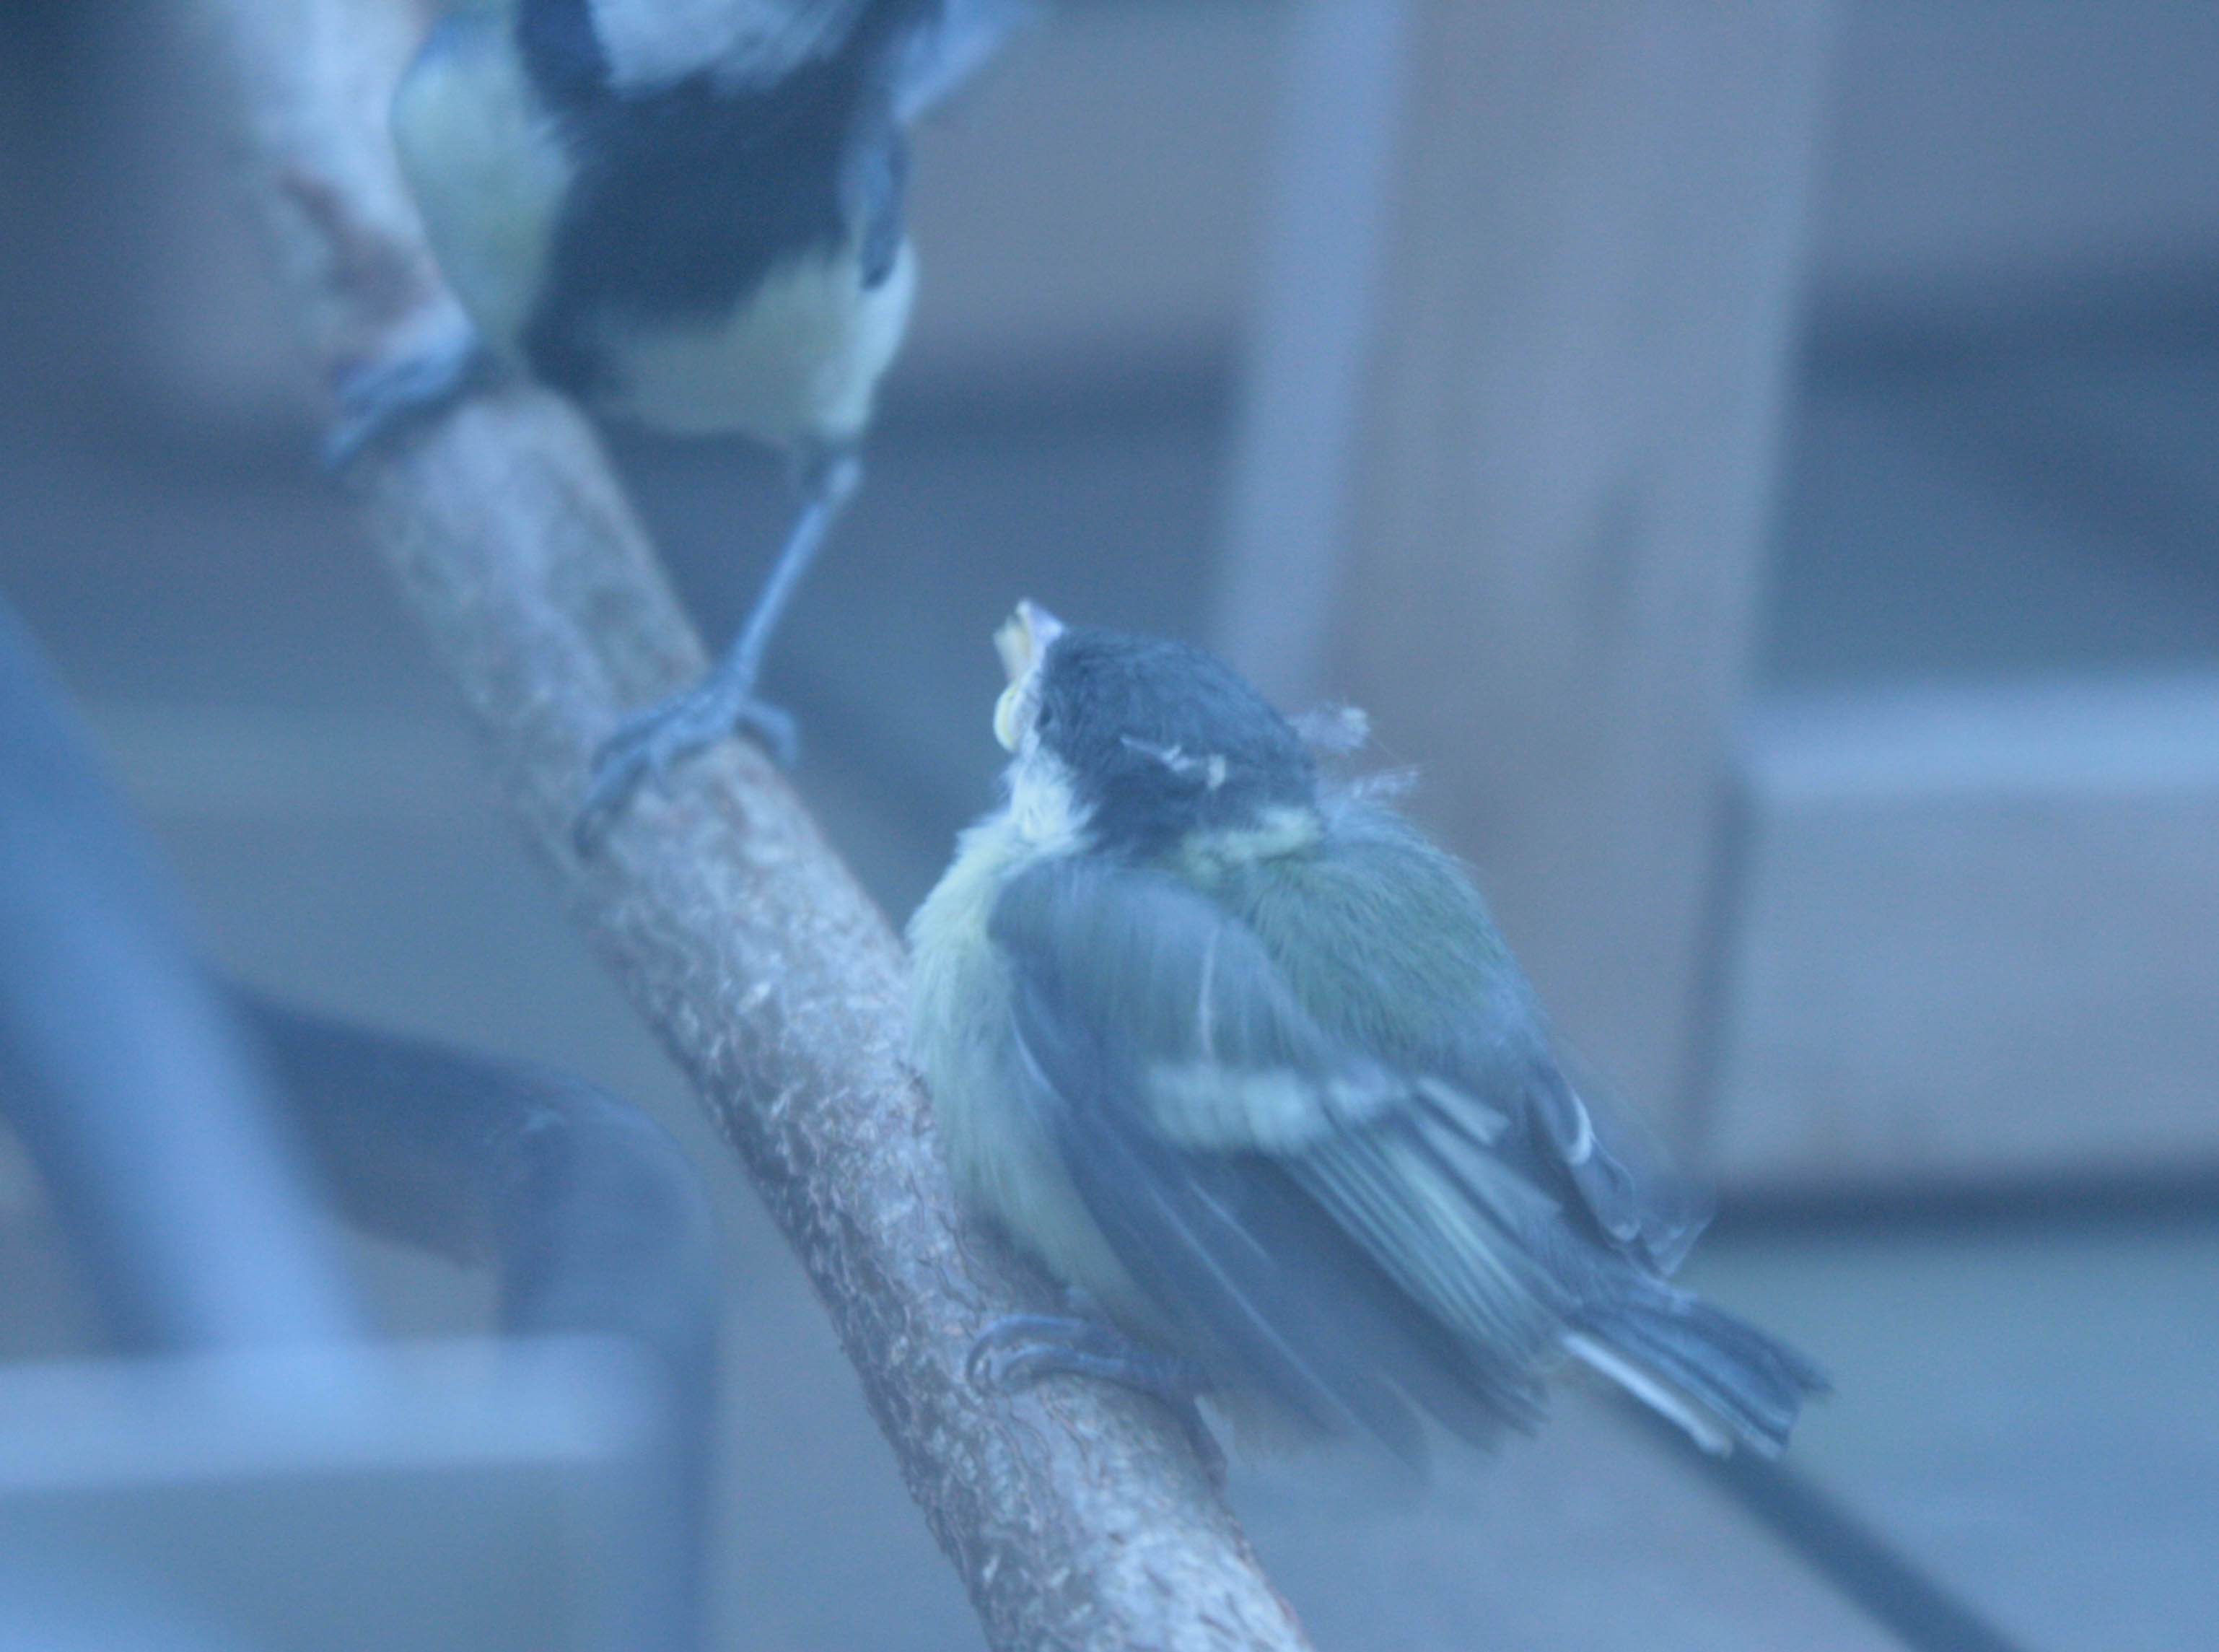 coal tit- chick-feeding time- photo by justin bere.jpg